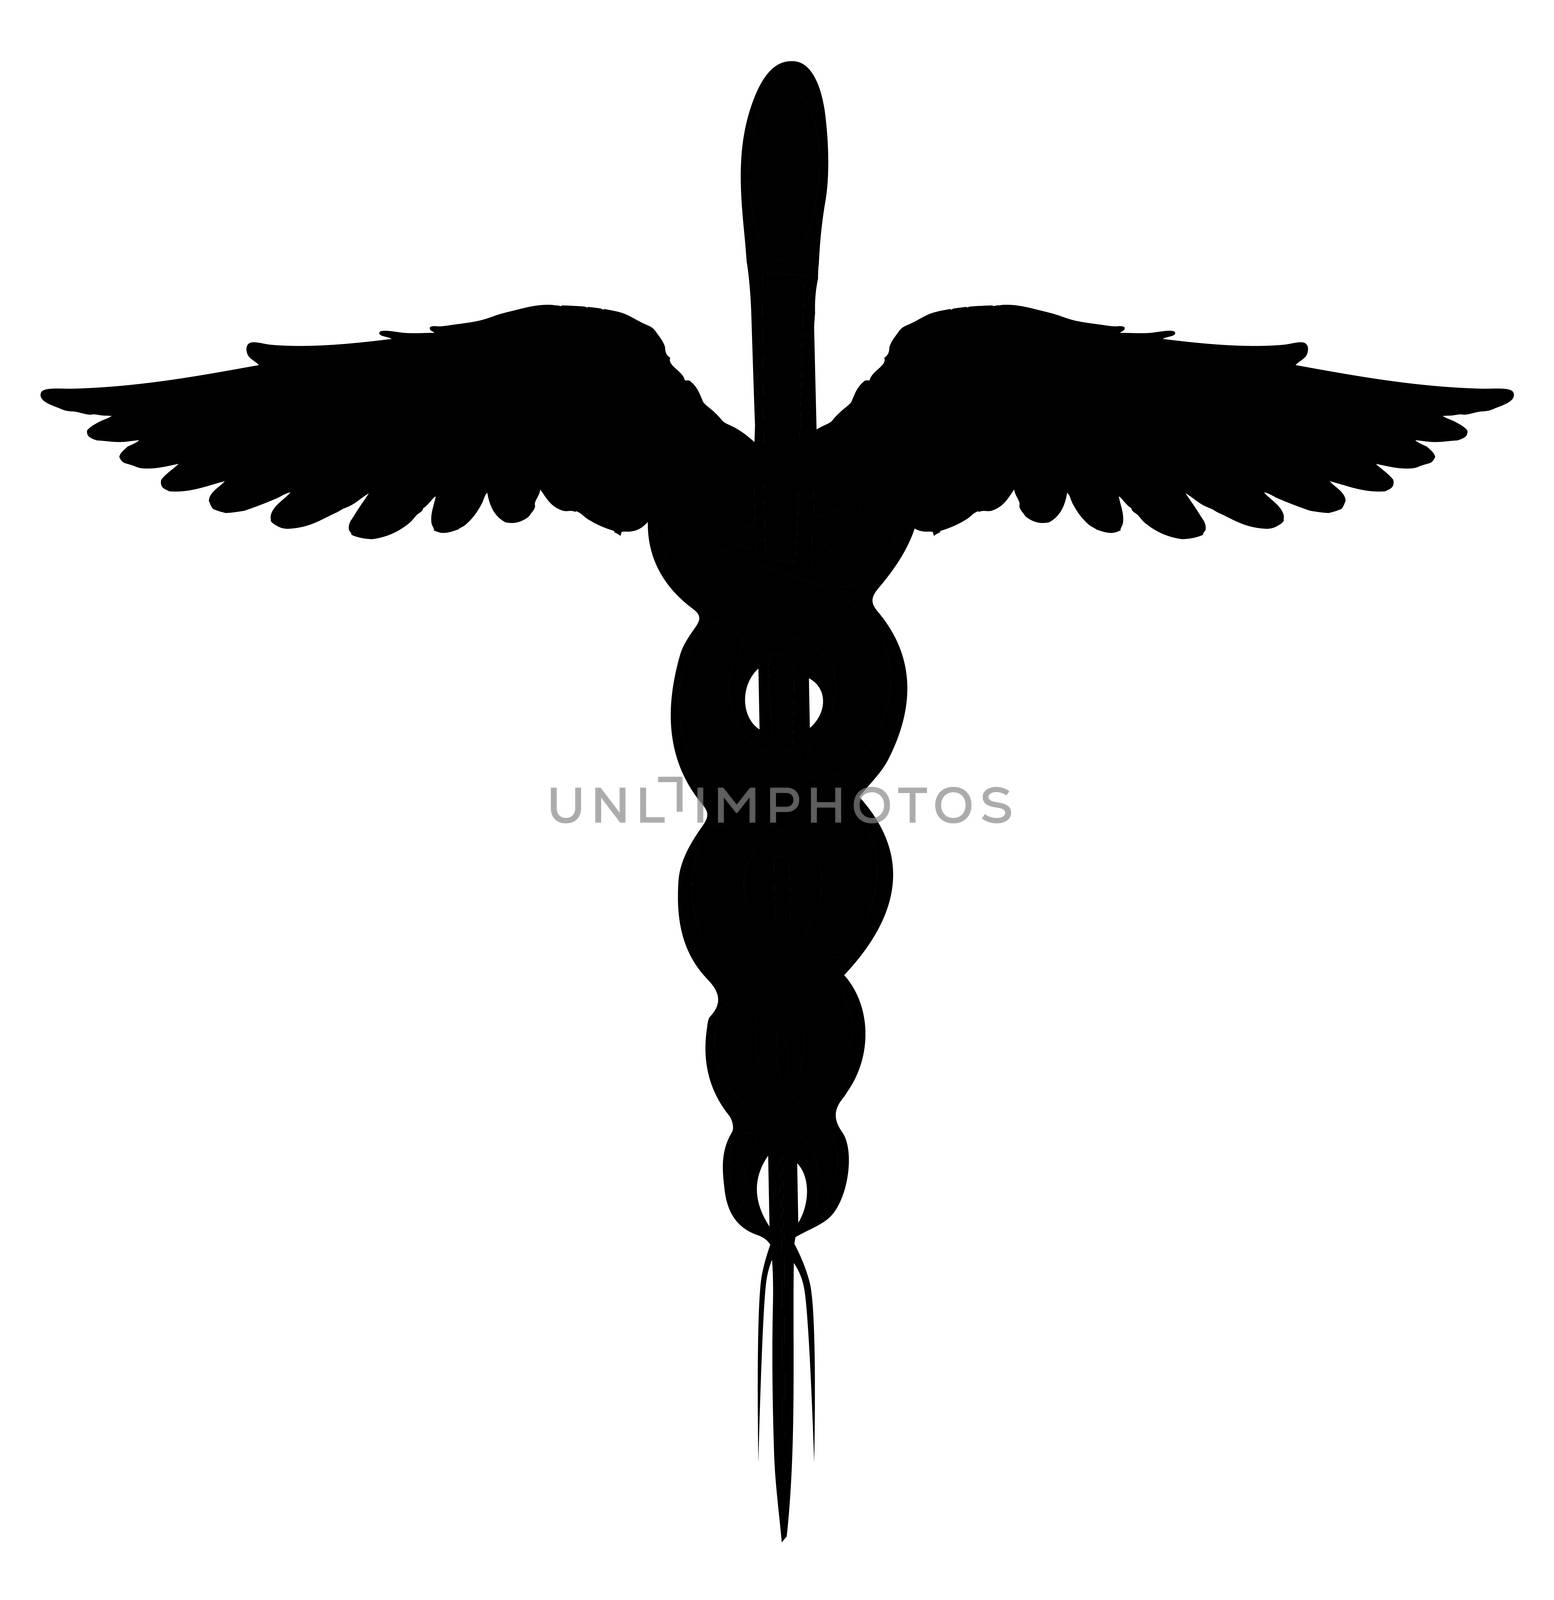 The Caduceus Medical Symbol isolated on a white background